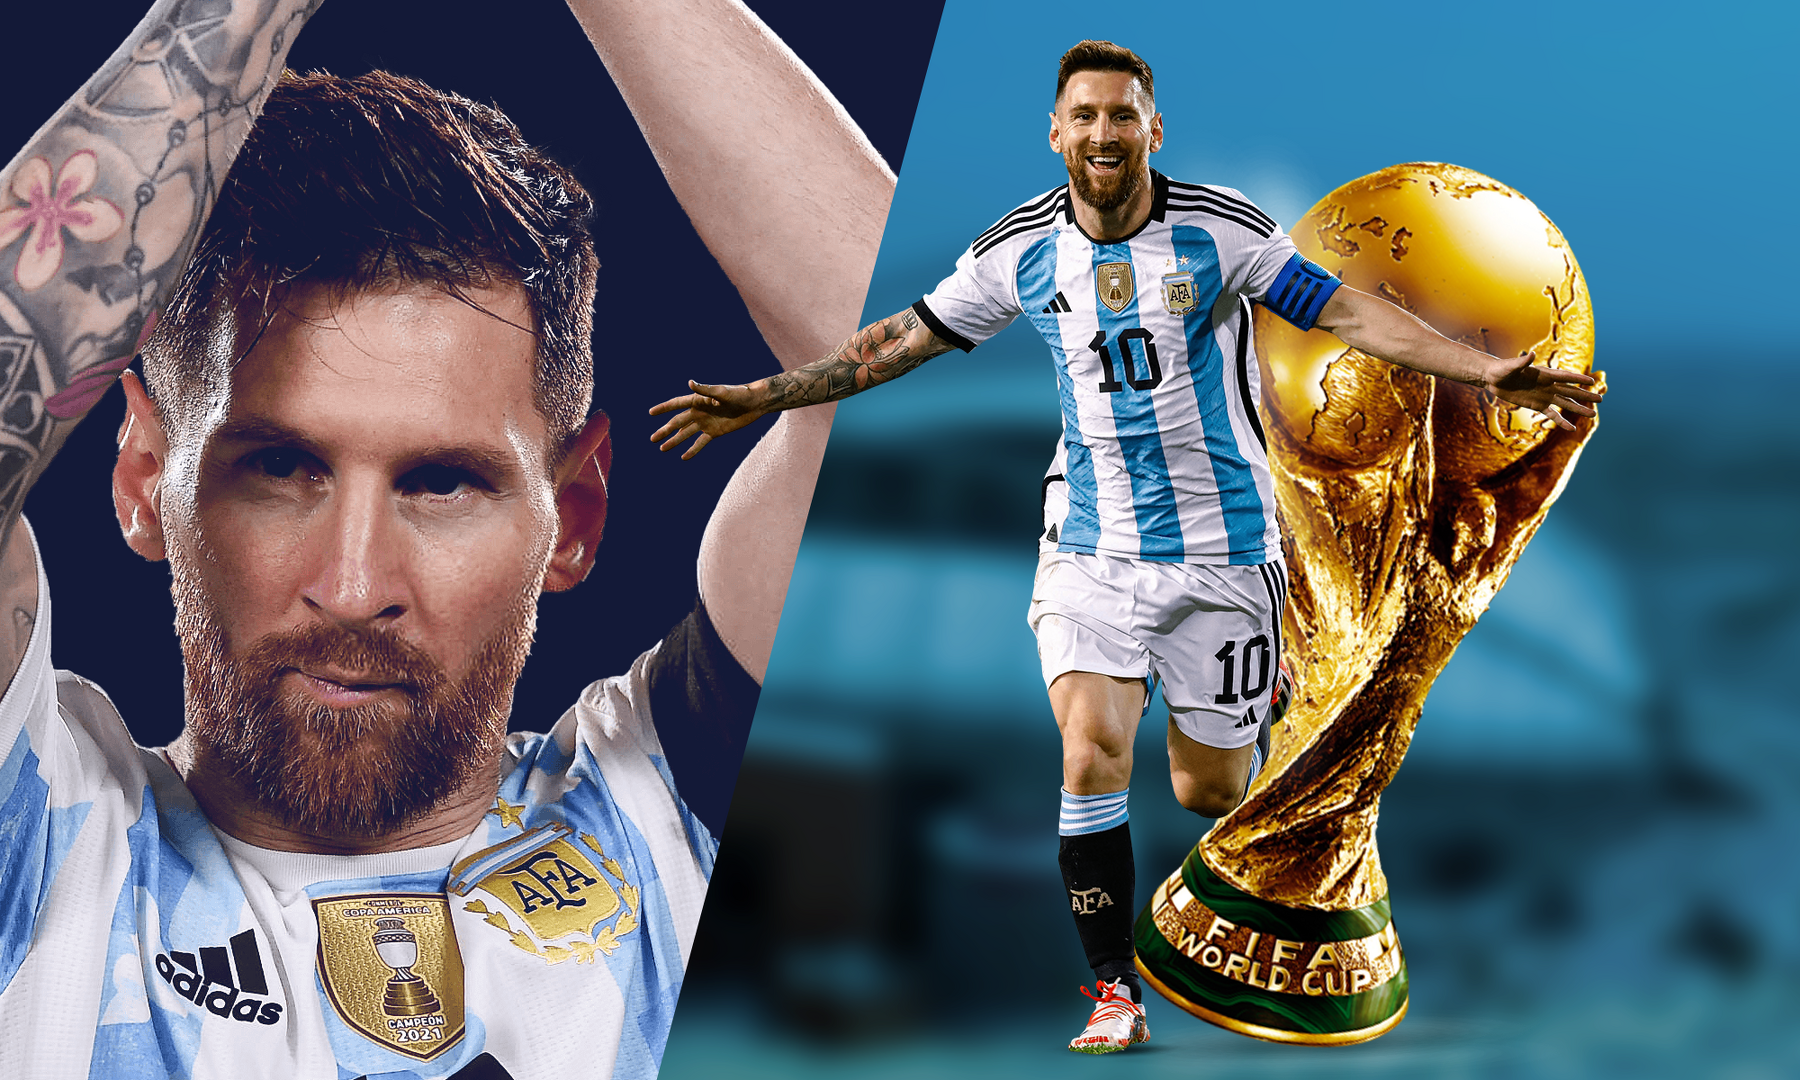 Records Lionel Messi can break in FIFA World Cup 2022 final